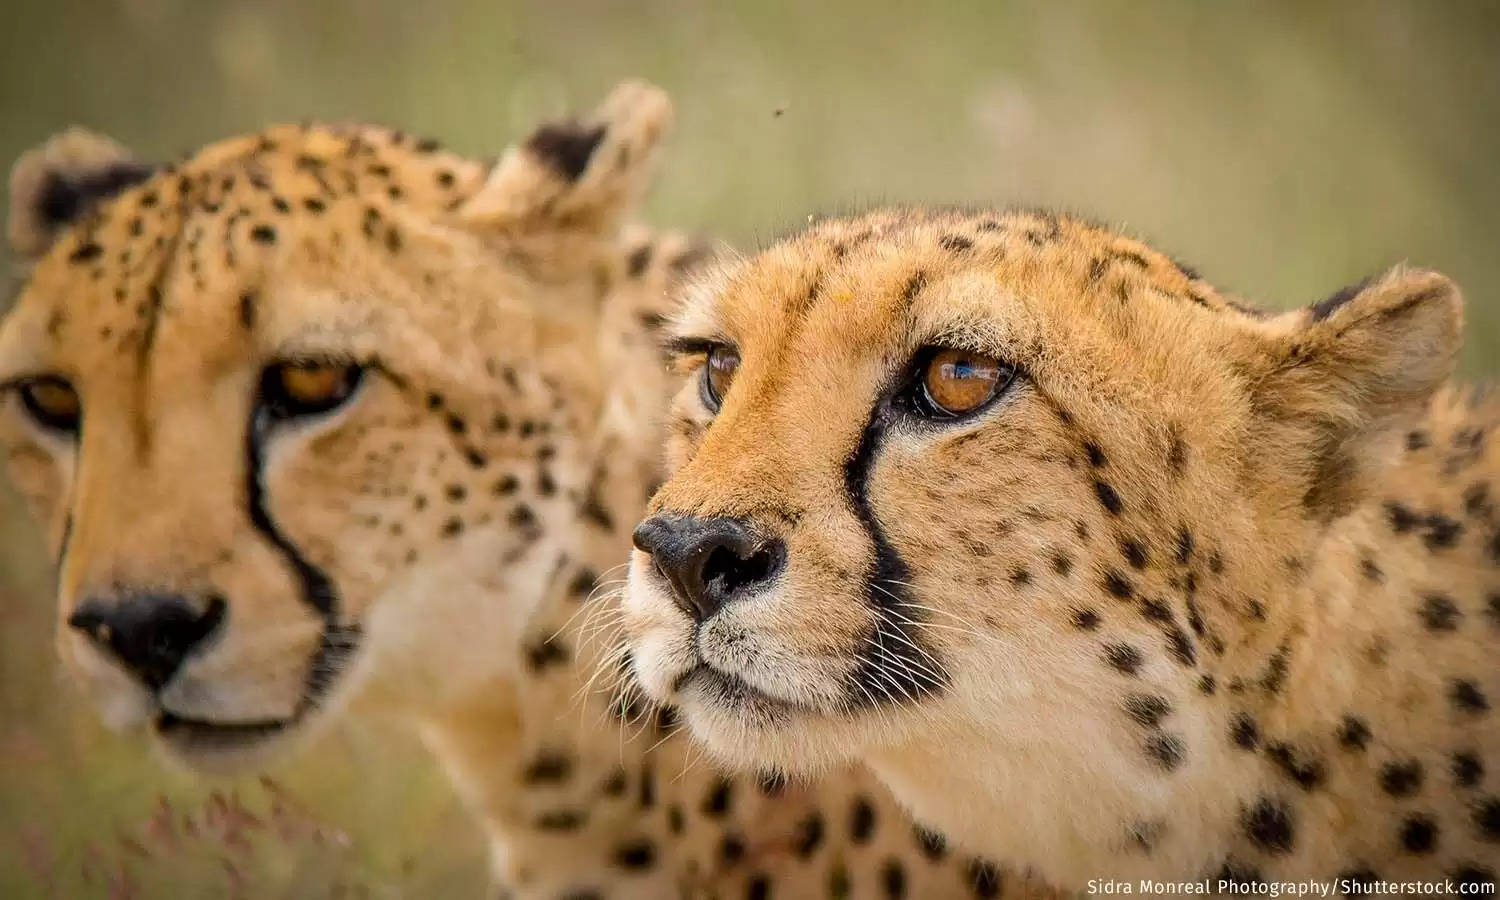 Cost Of Getting Namibia's Cheetahs to India Revealed!